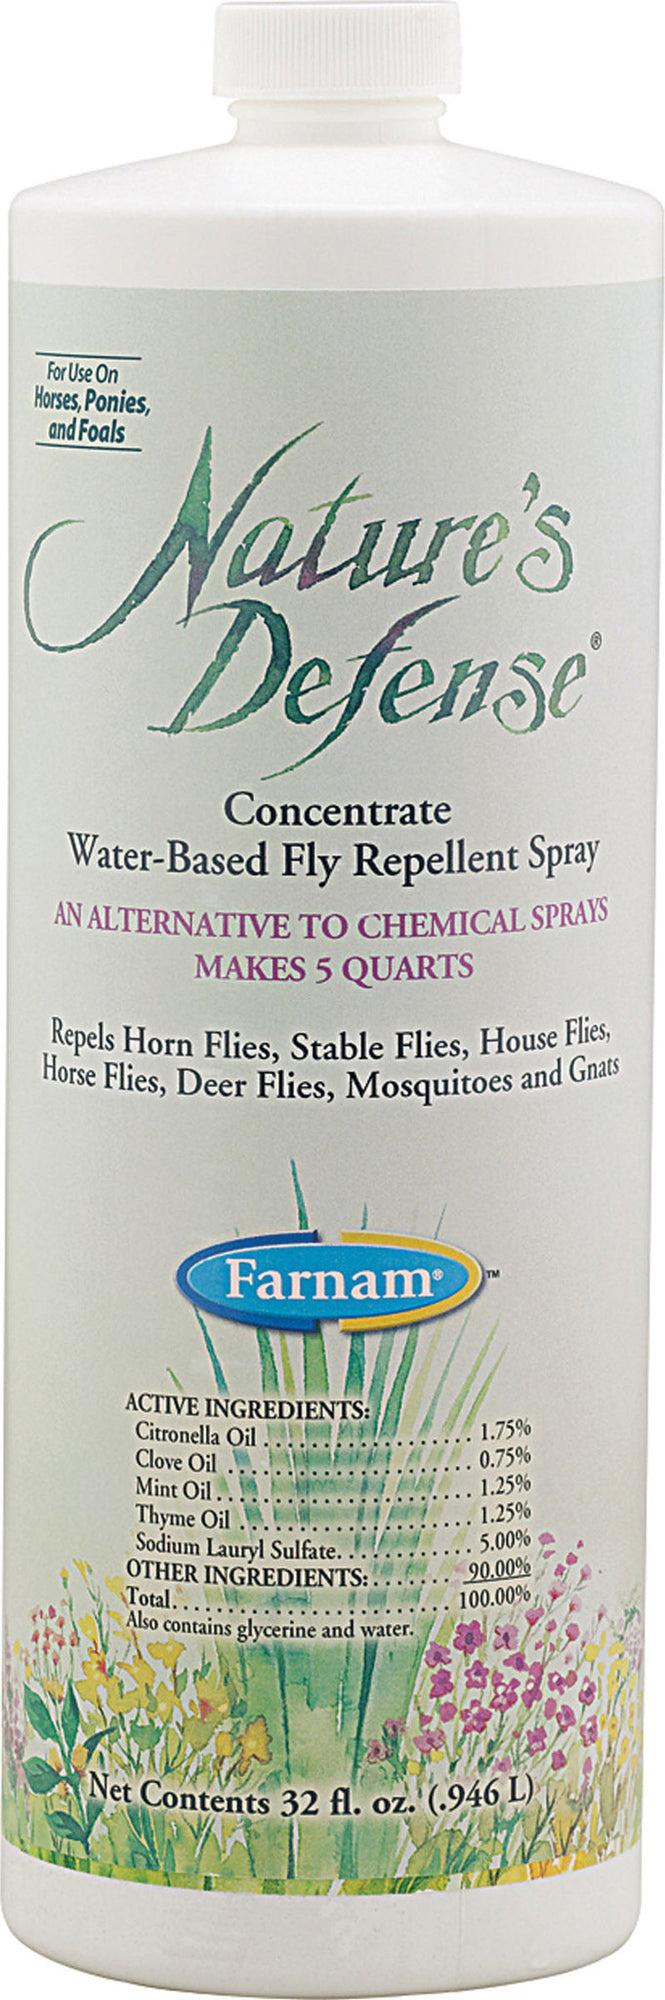 Nature’s Defense Water Based Concentrate Fly Repellent